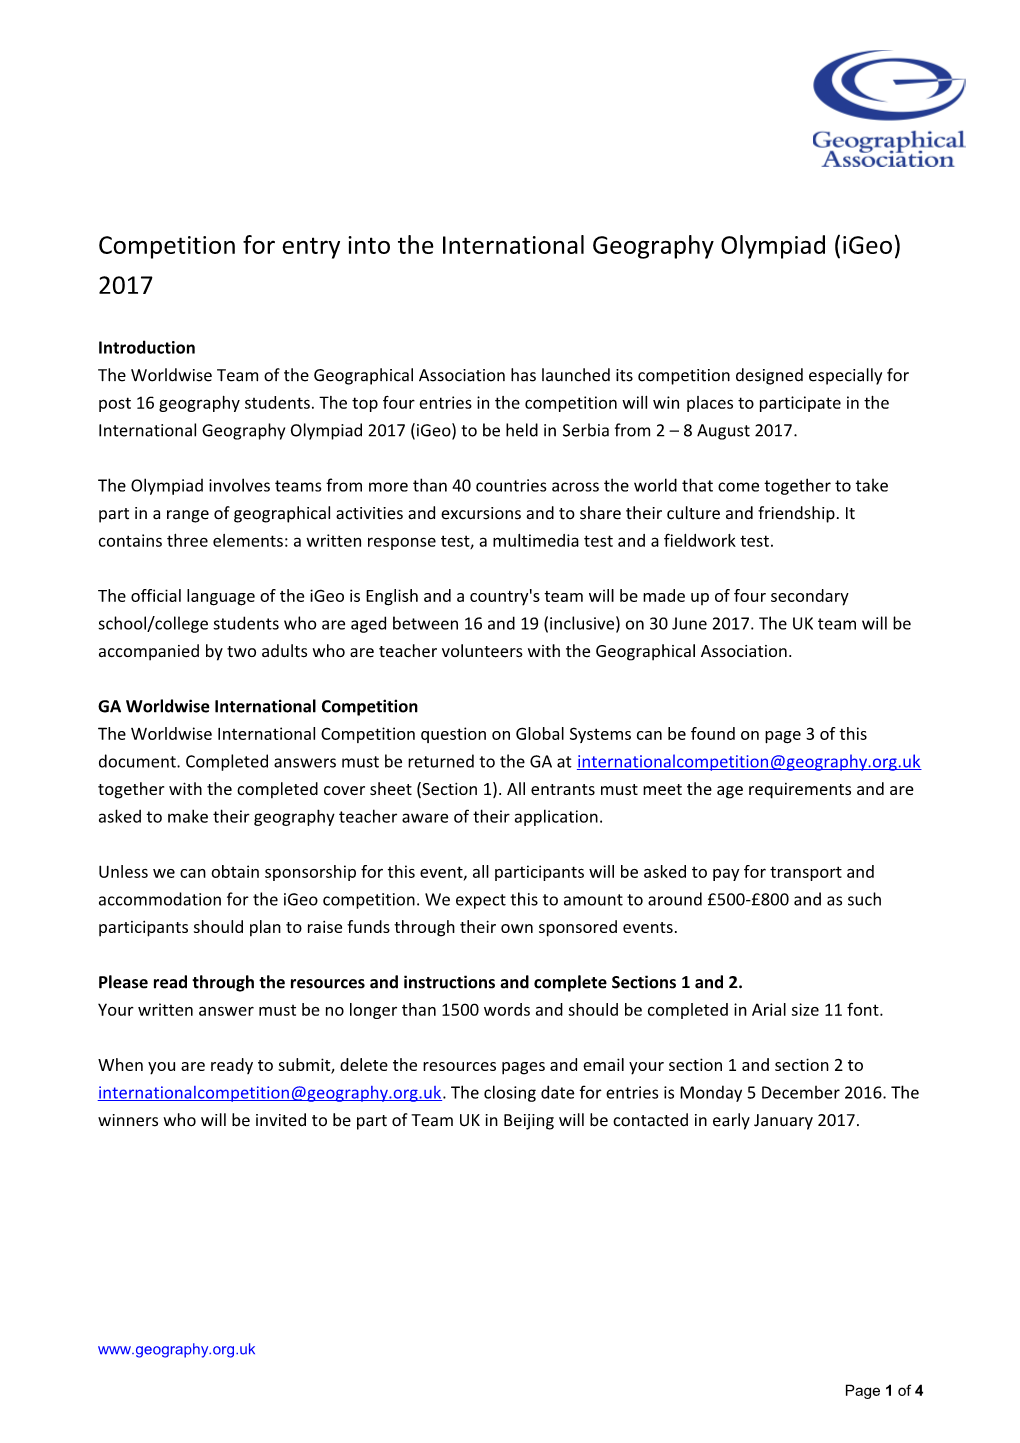 Competition for Entry Into the International Geography Olympiad (Igeo) 2017